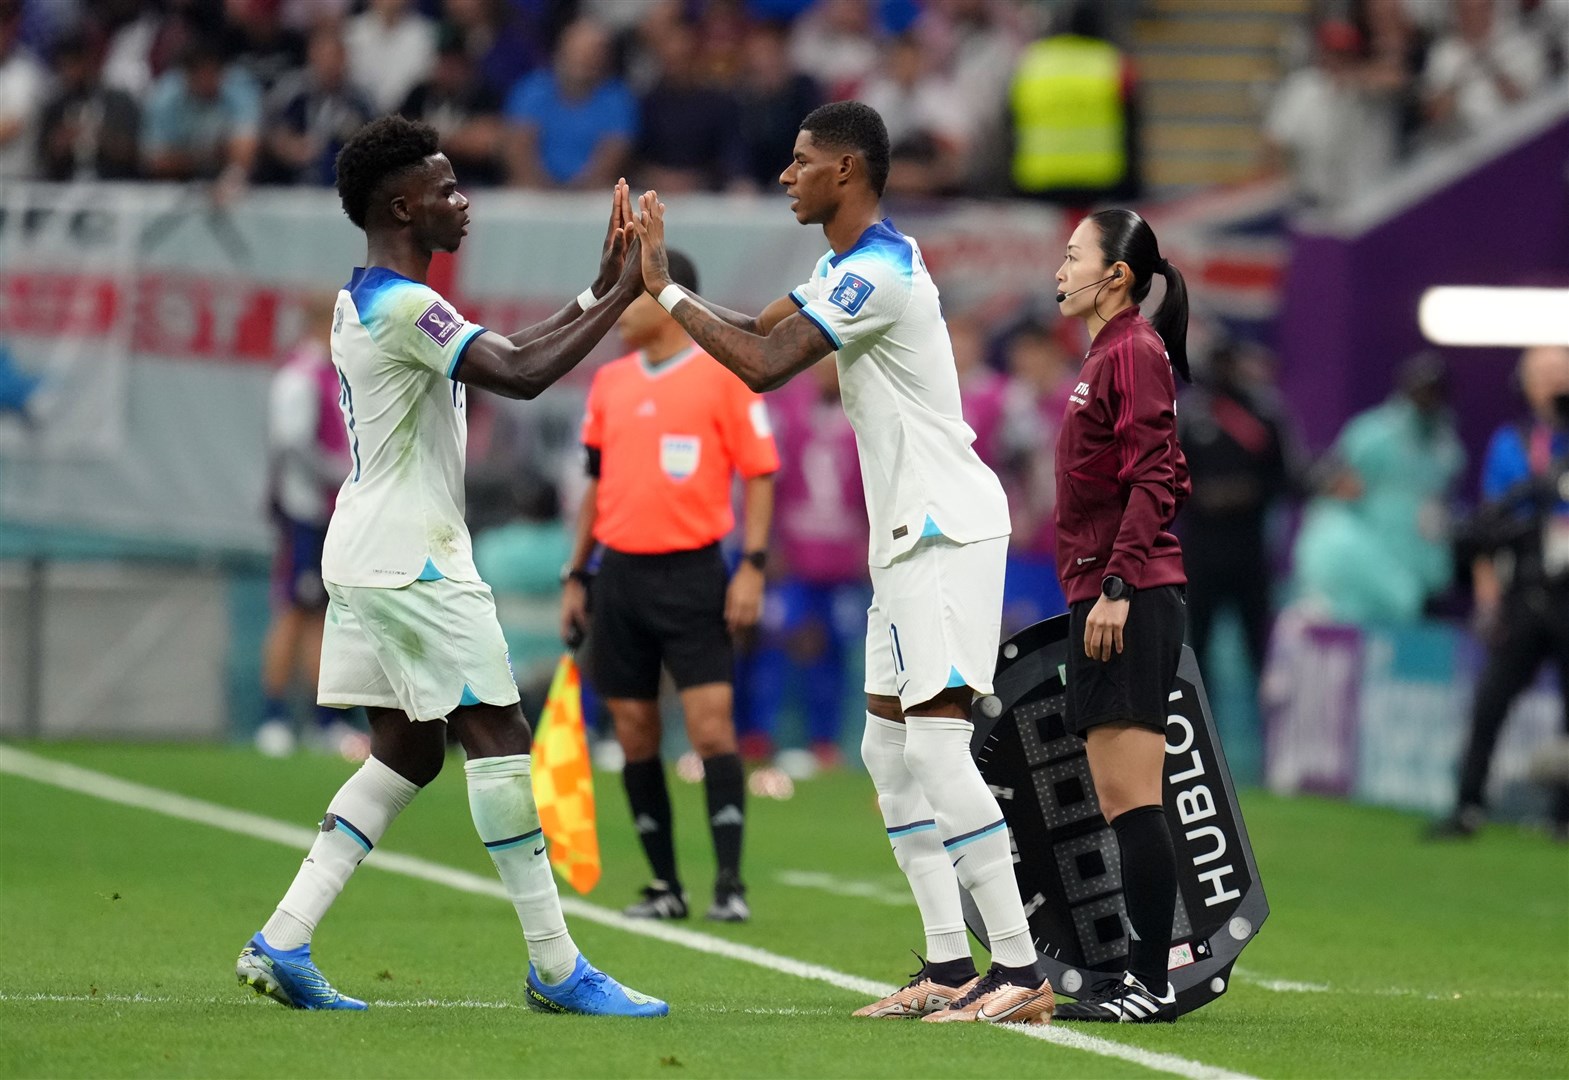 England’s Marcus Rashford (right) and Bukayo Saka showed that ‘our diversity is our strength’ at the 2022 World Cup, an FA special adviser has said (Nick Potts/PA)